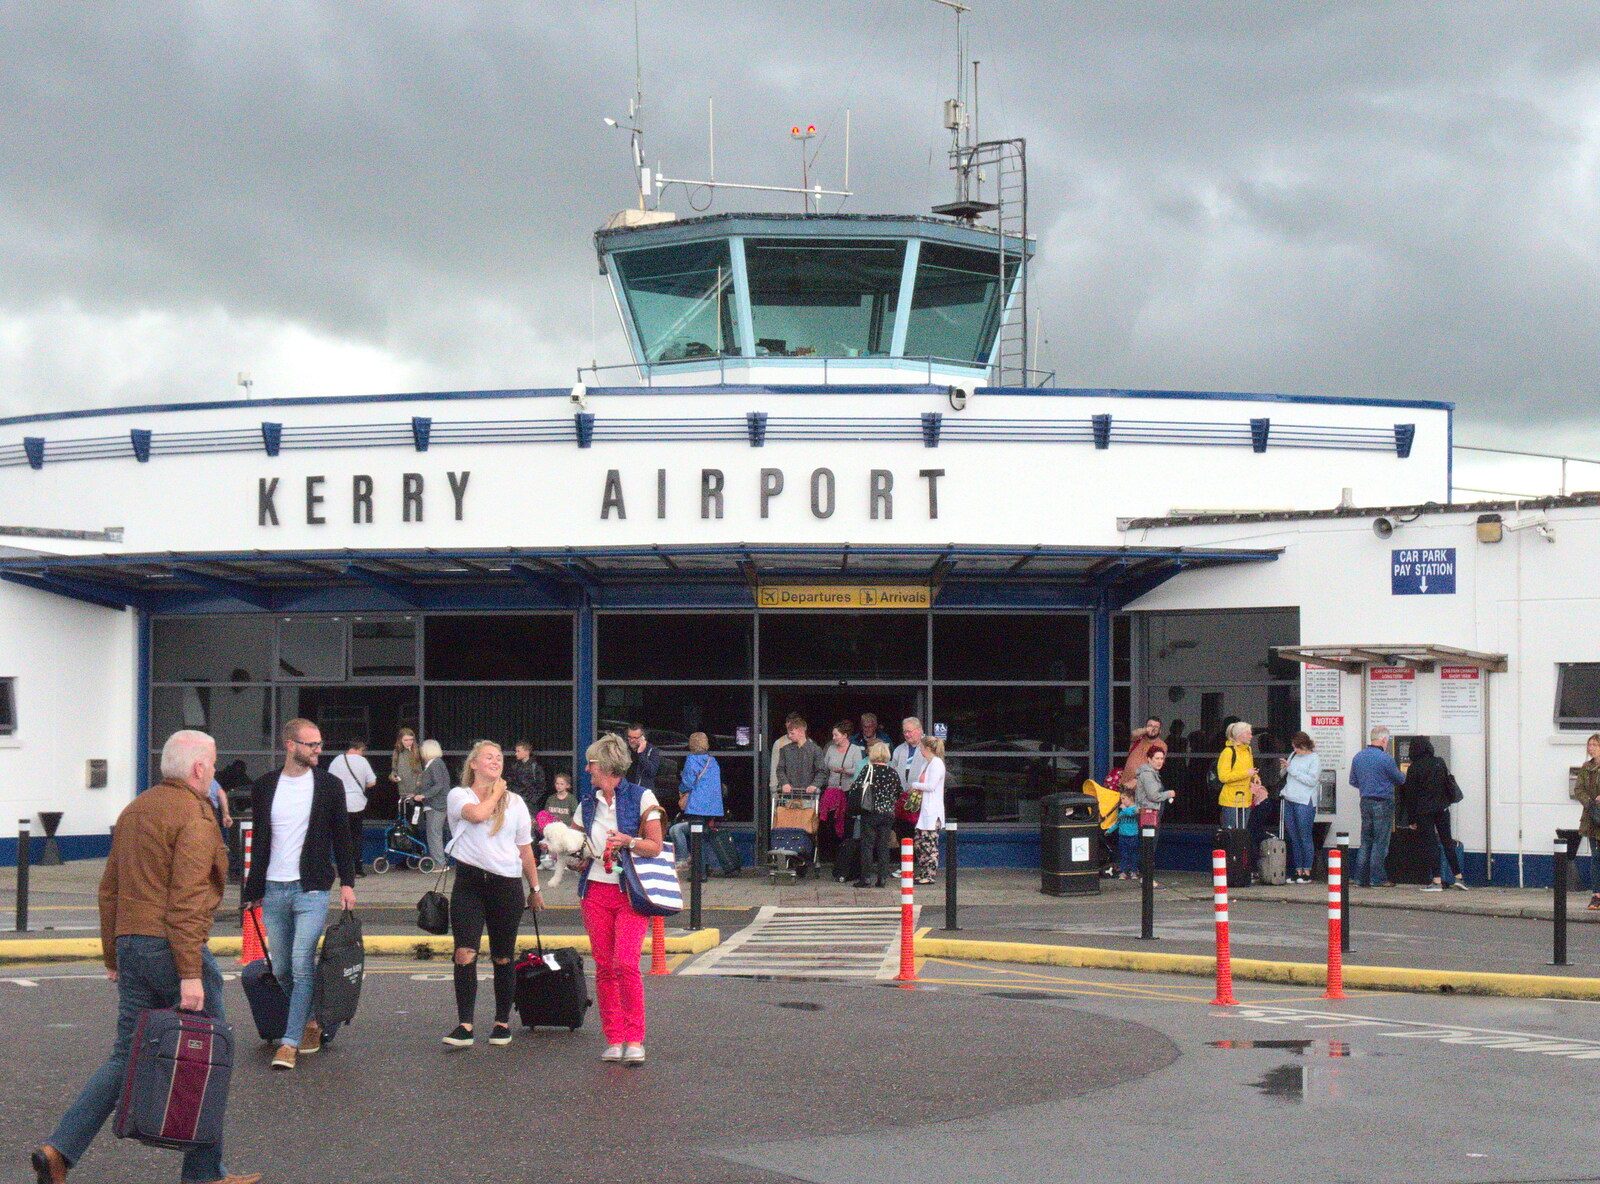 Crowds outside Kerry Airport from Liverpool to Baile an Sceilg, County Kerry, Ireland - 30th July 2017